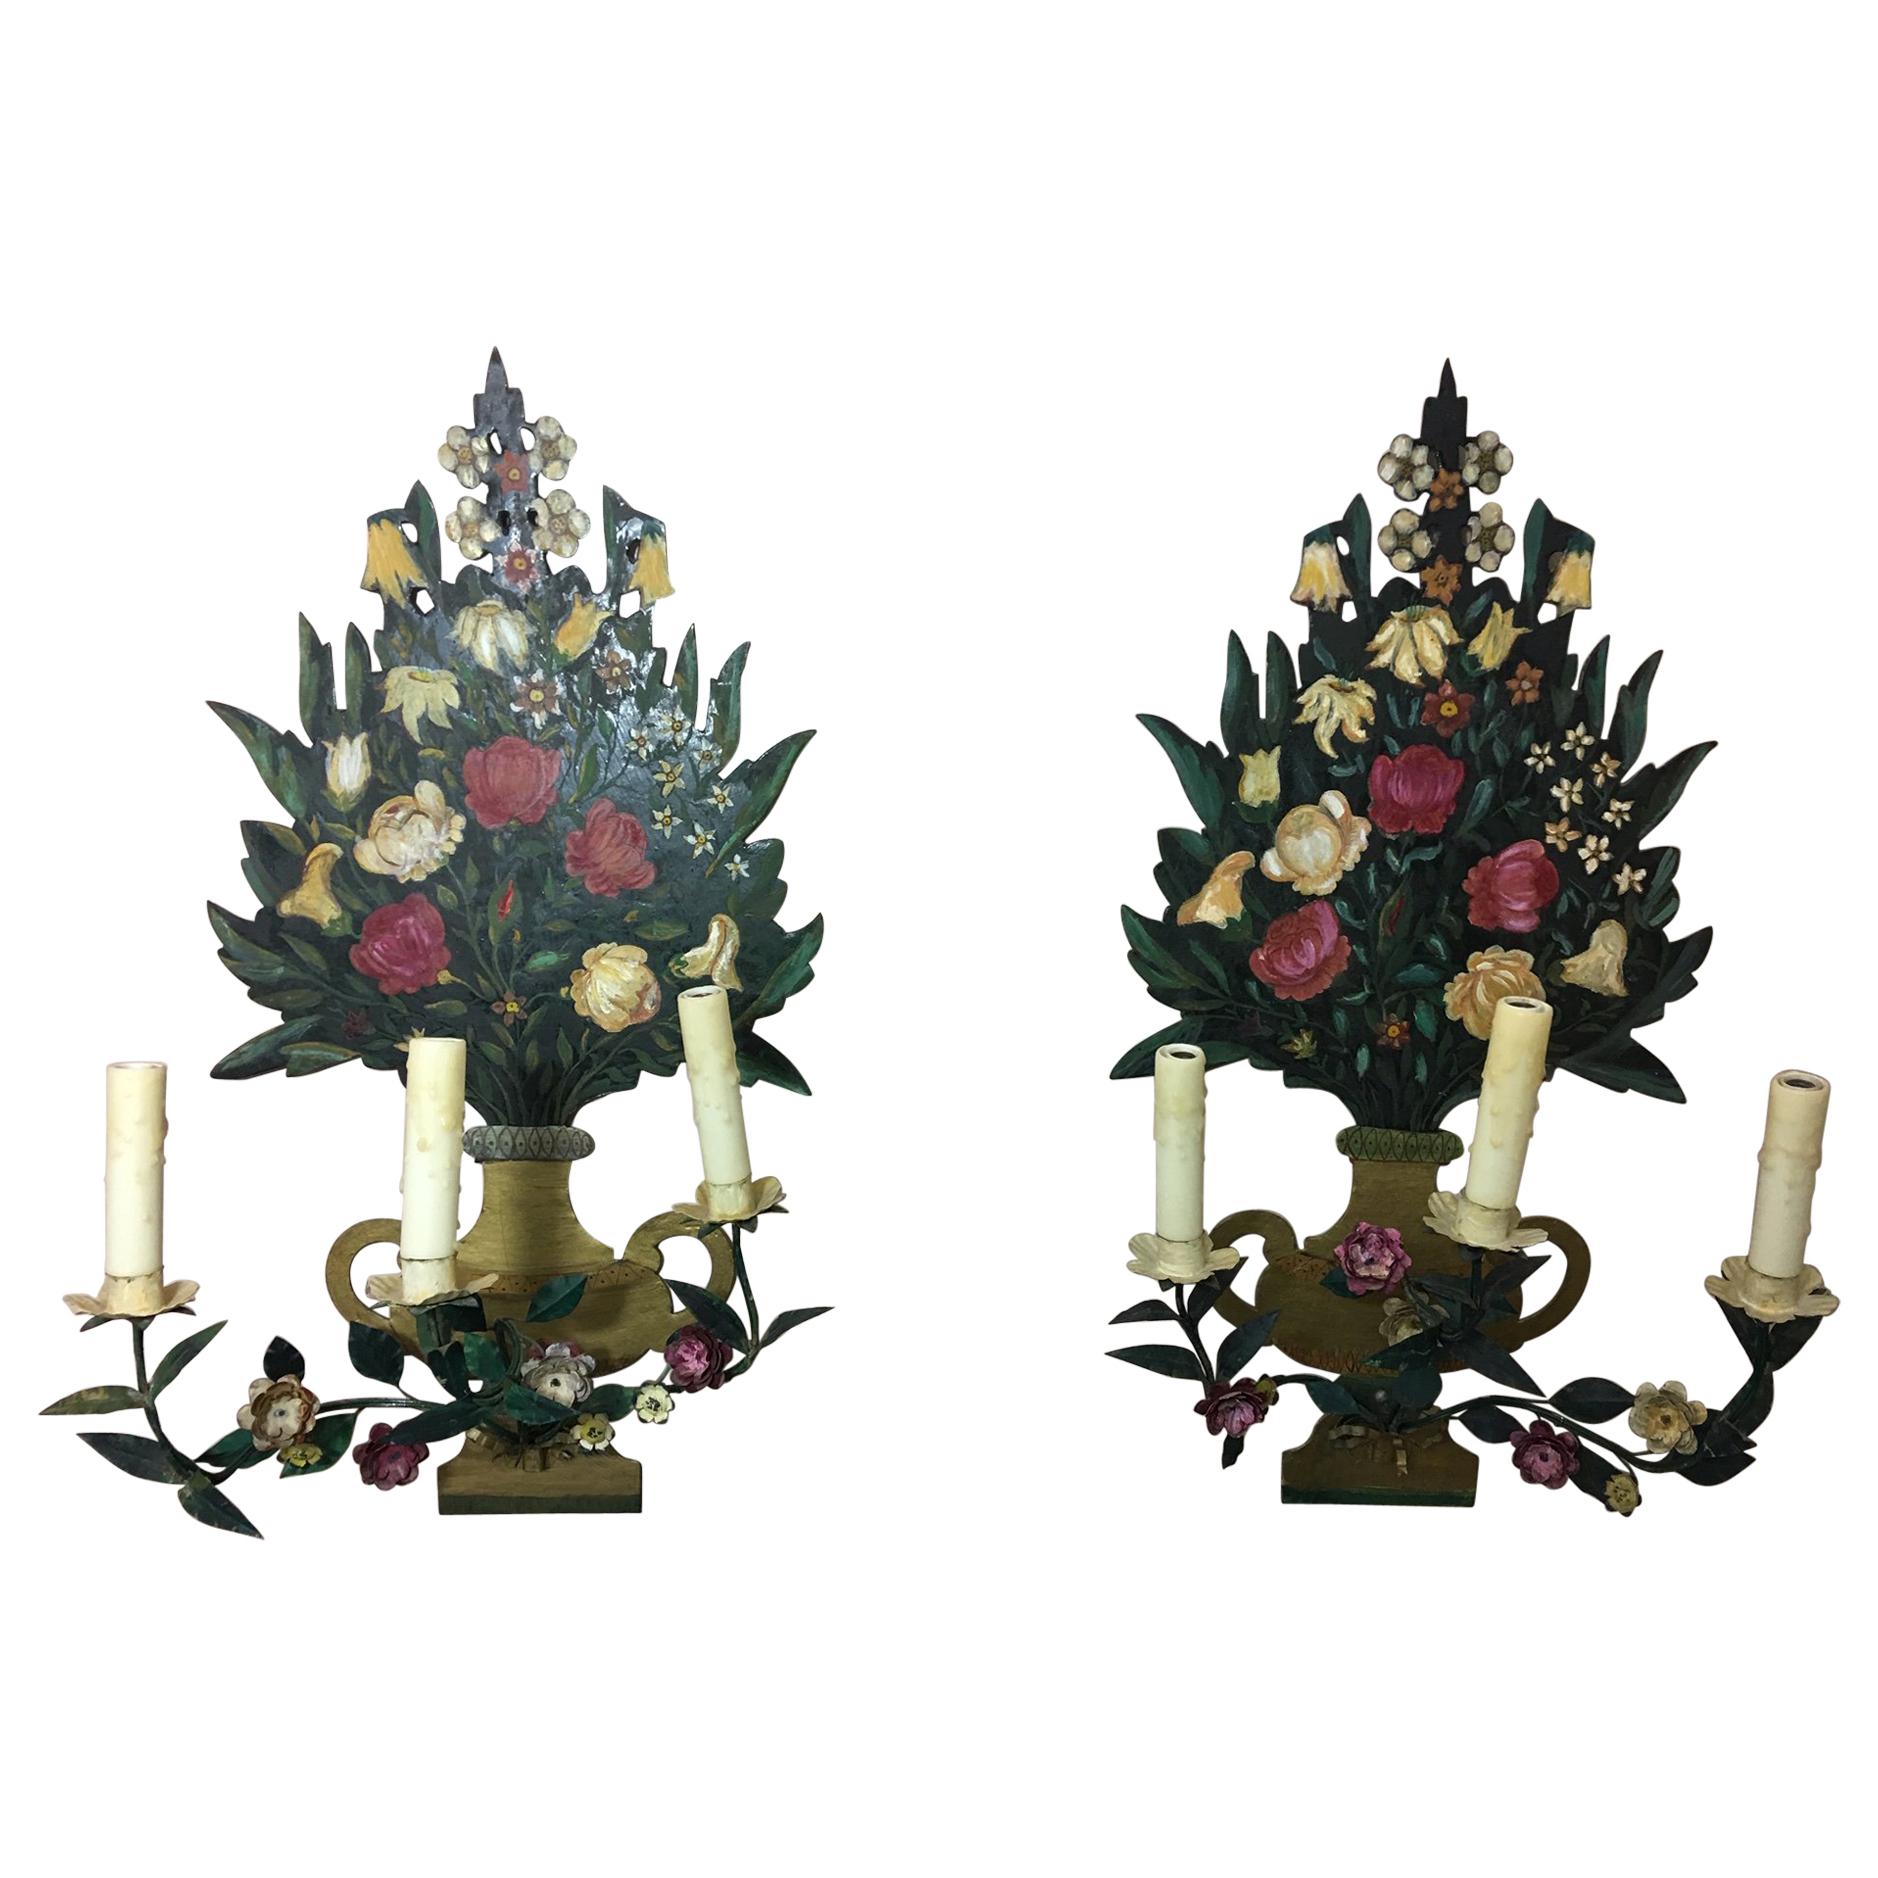 Pair of Painted Flower Back Three-Light Wall Sconces, Mid-20th Century